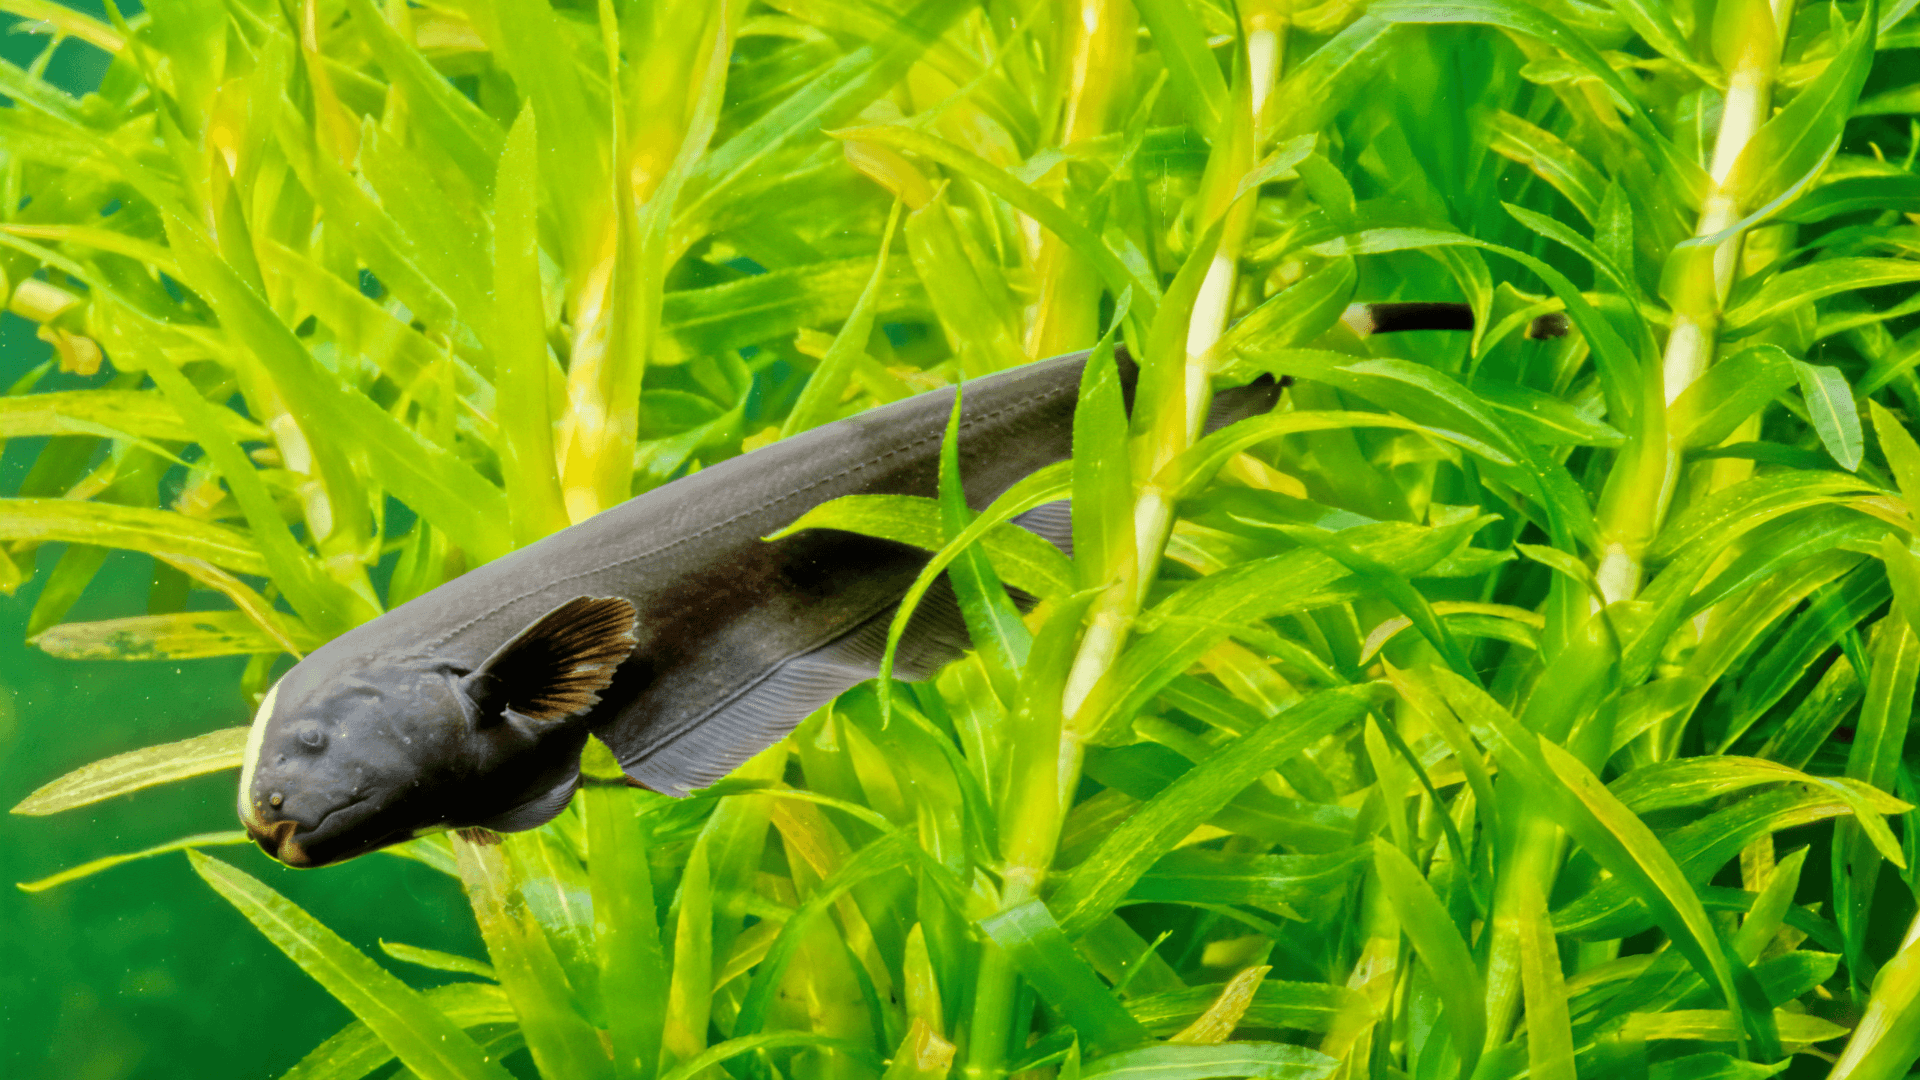 A photo of Knifefish